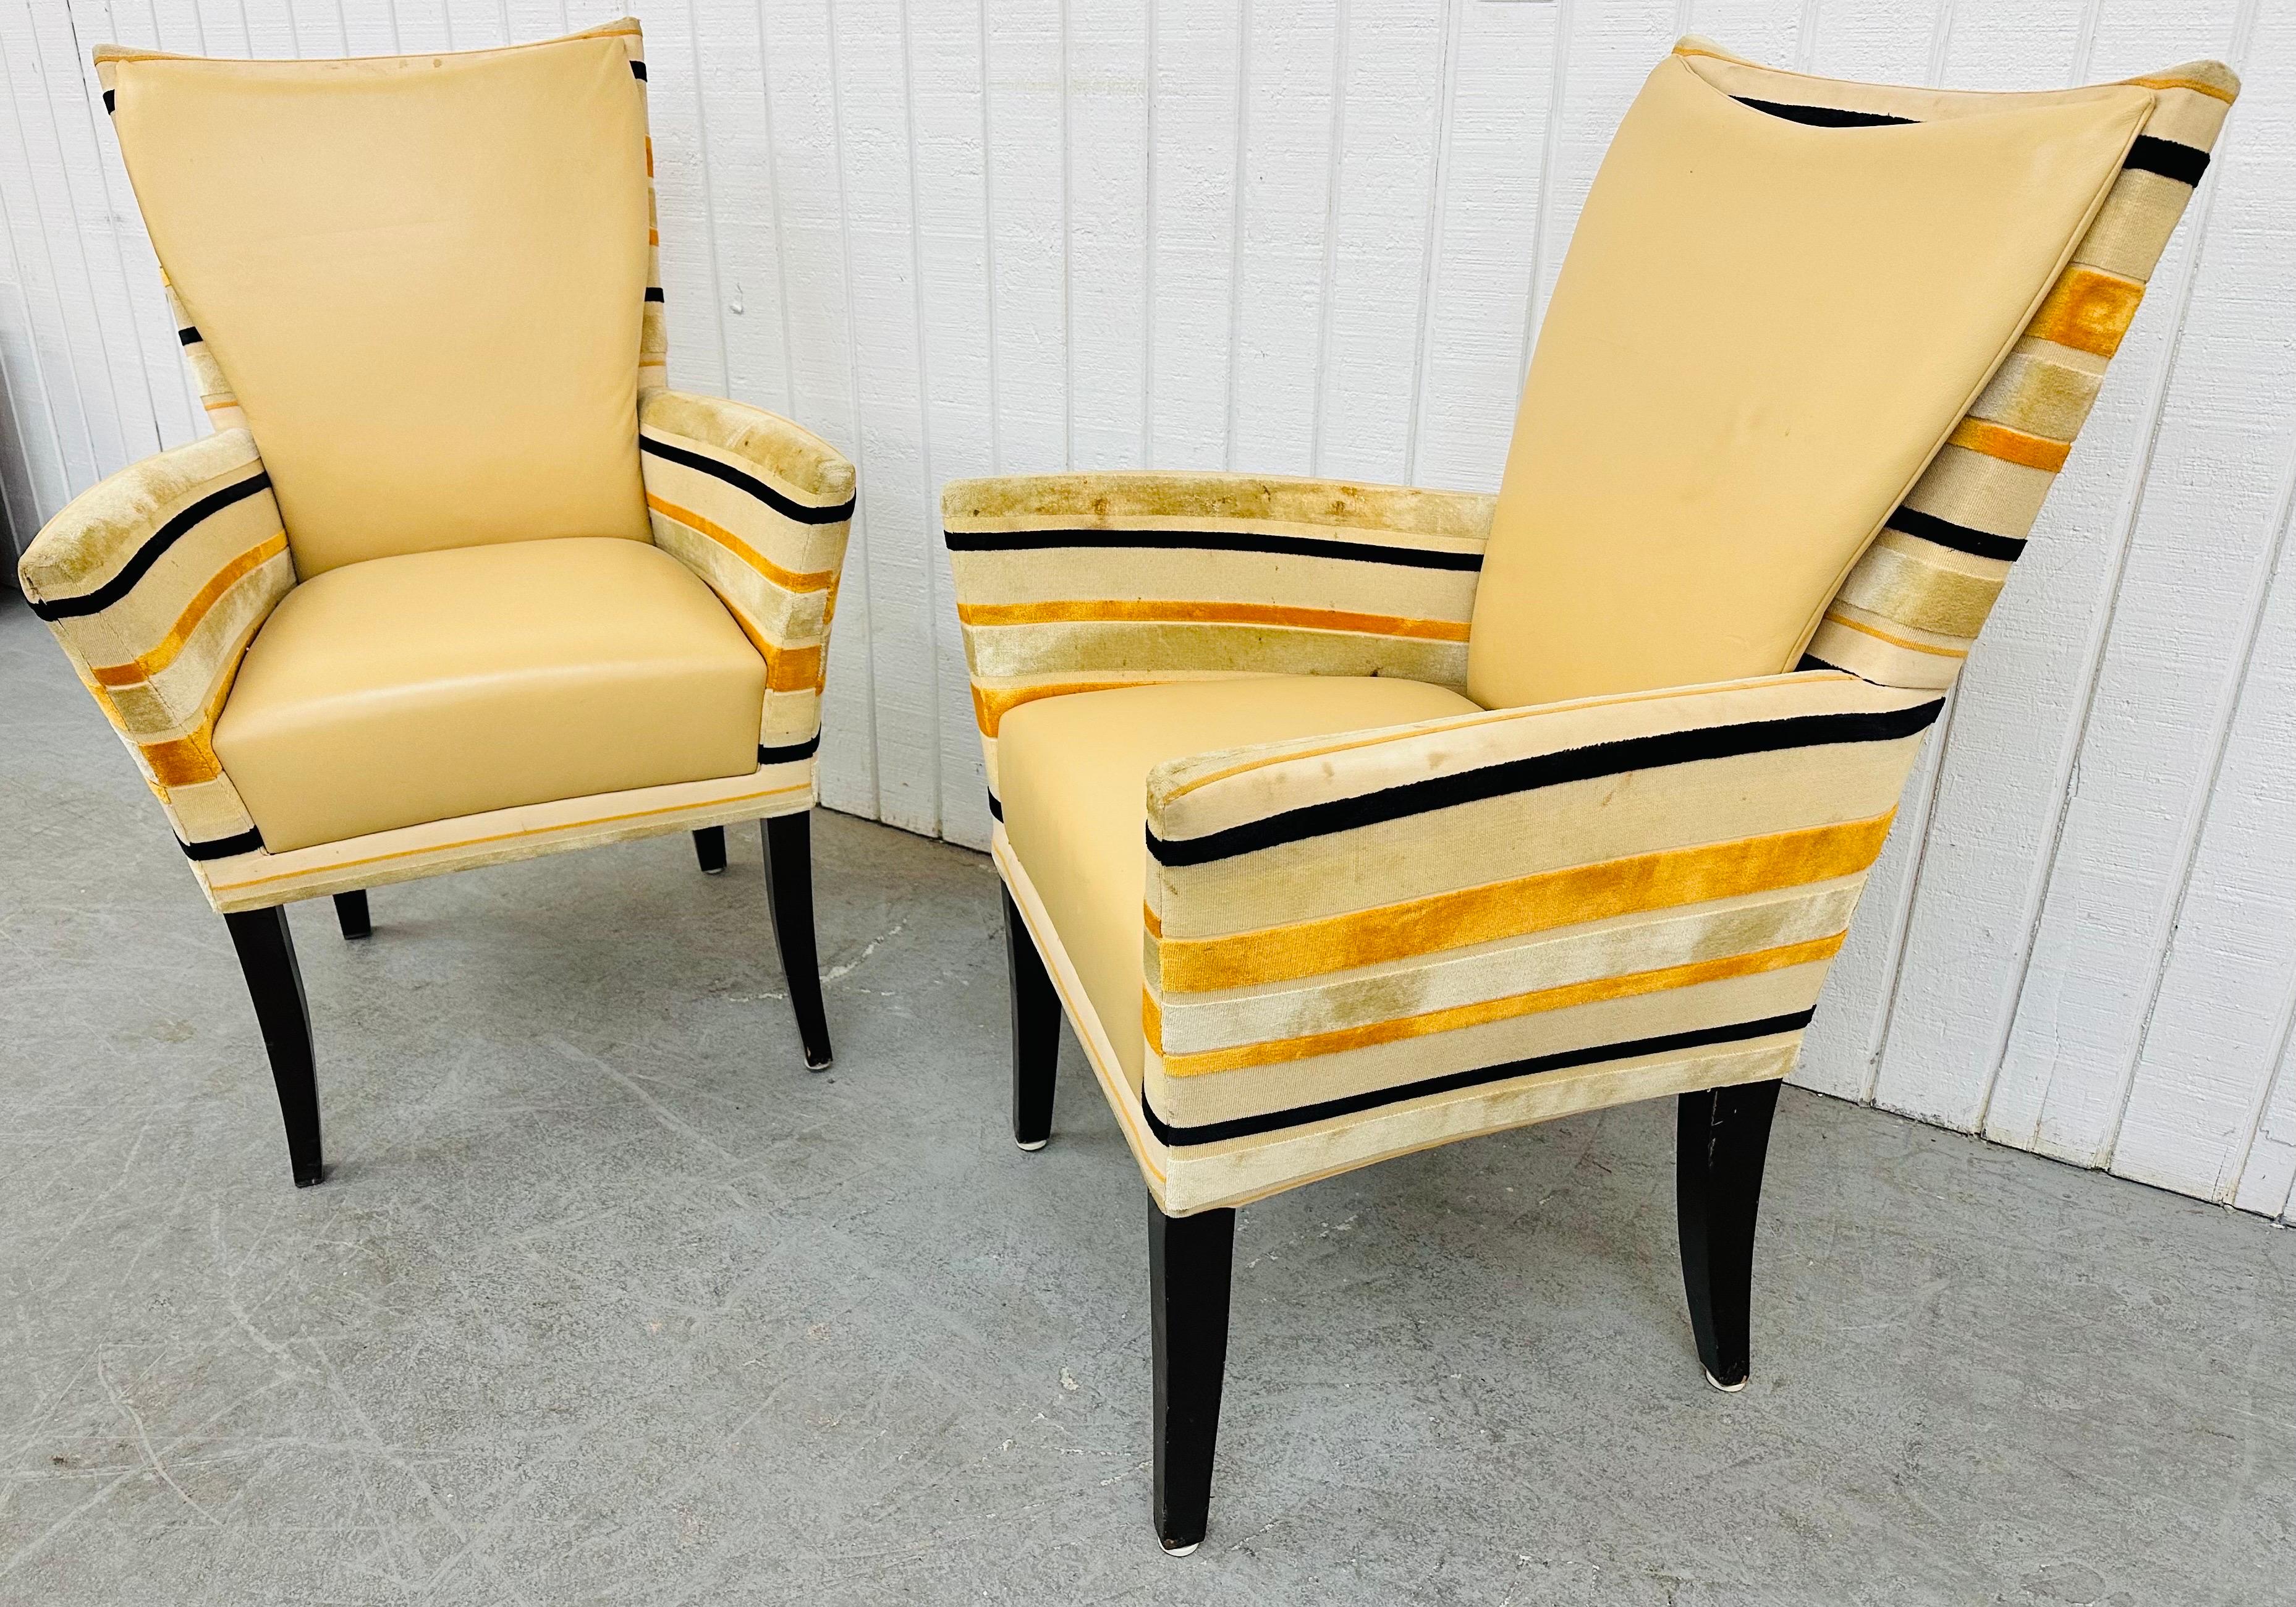 Art Deco Vintage Deco Style Lounge Chairs - Set of 2 For Sale